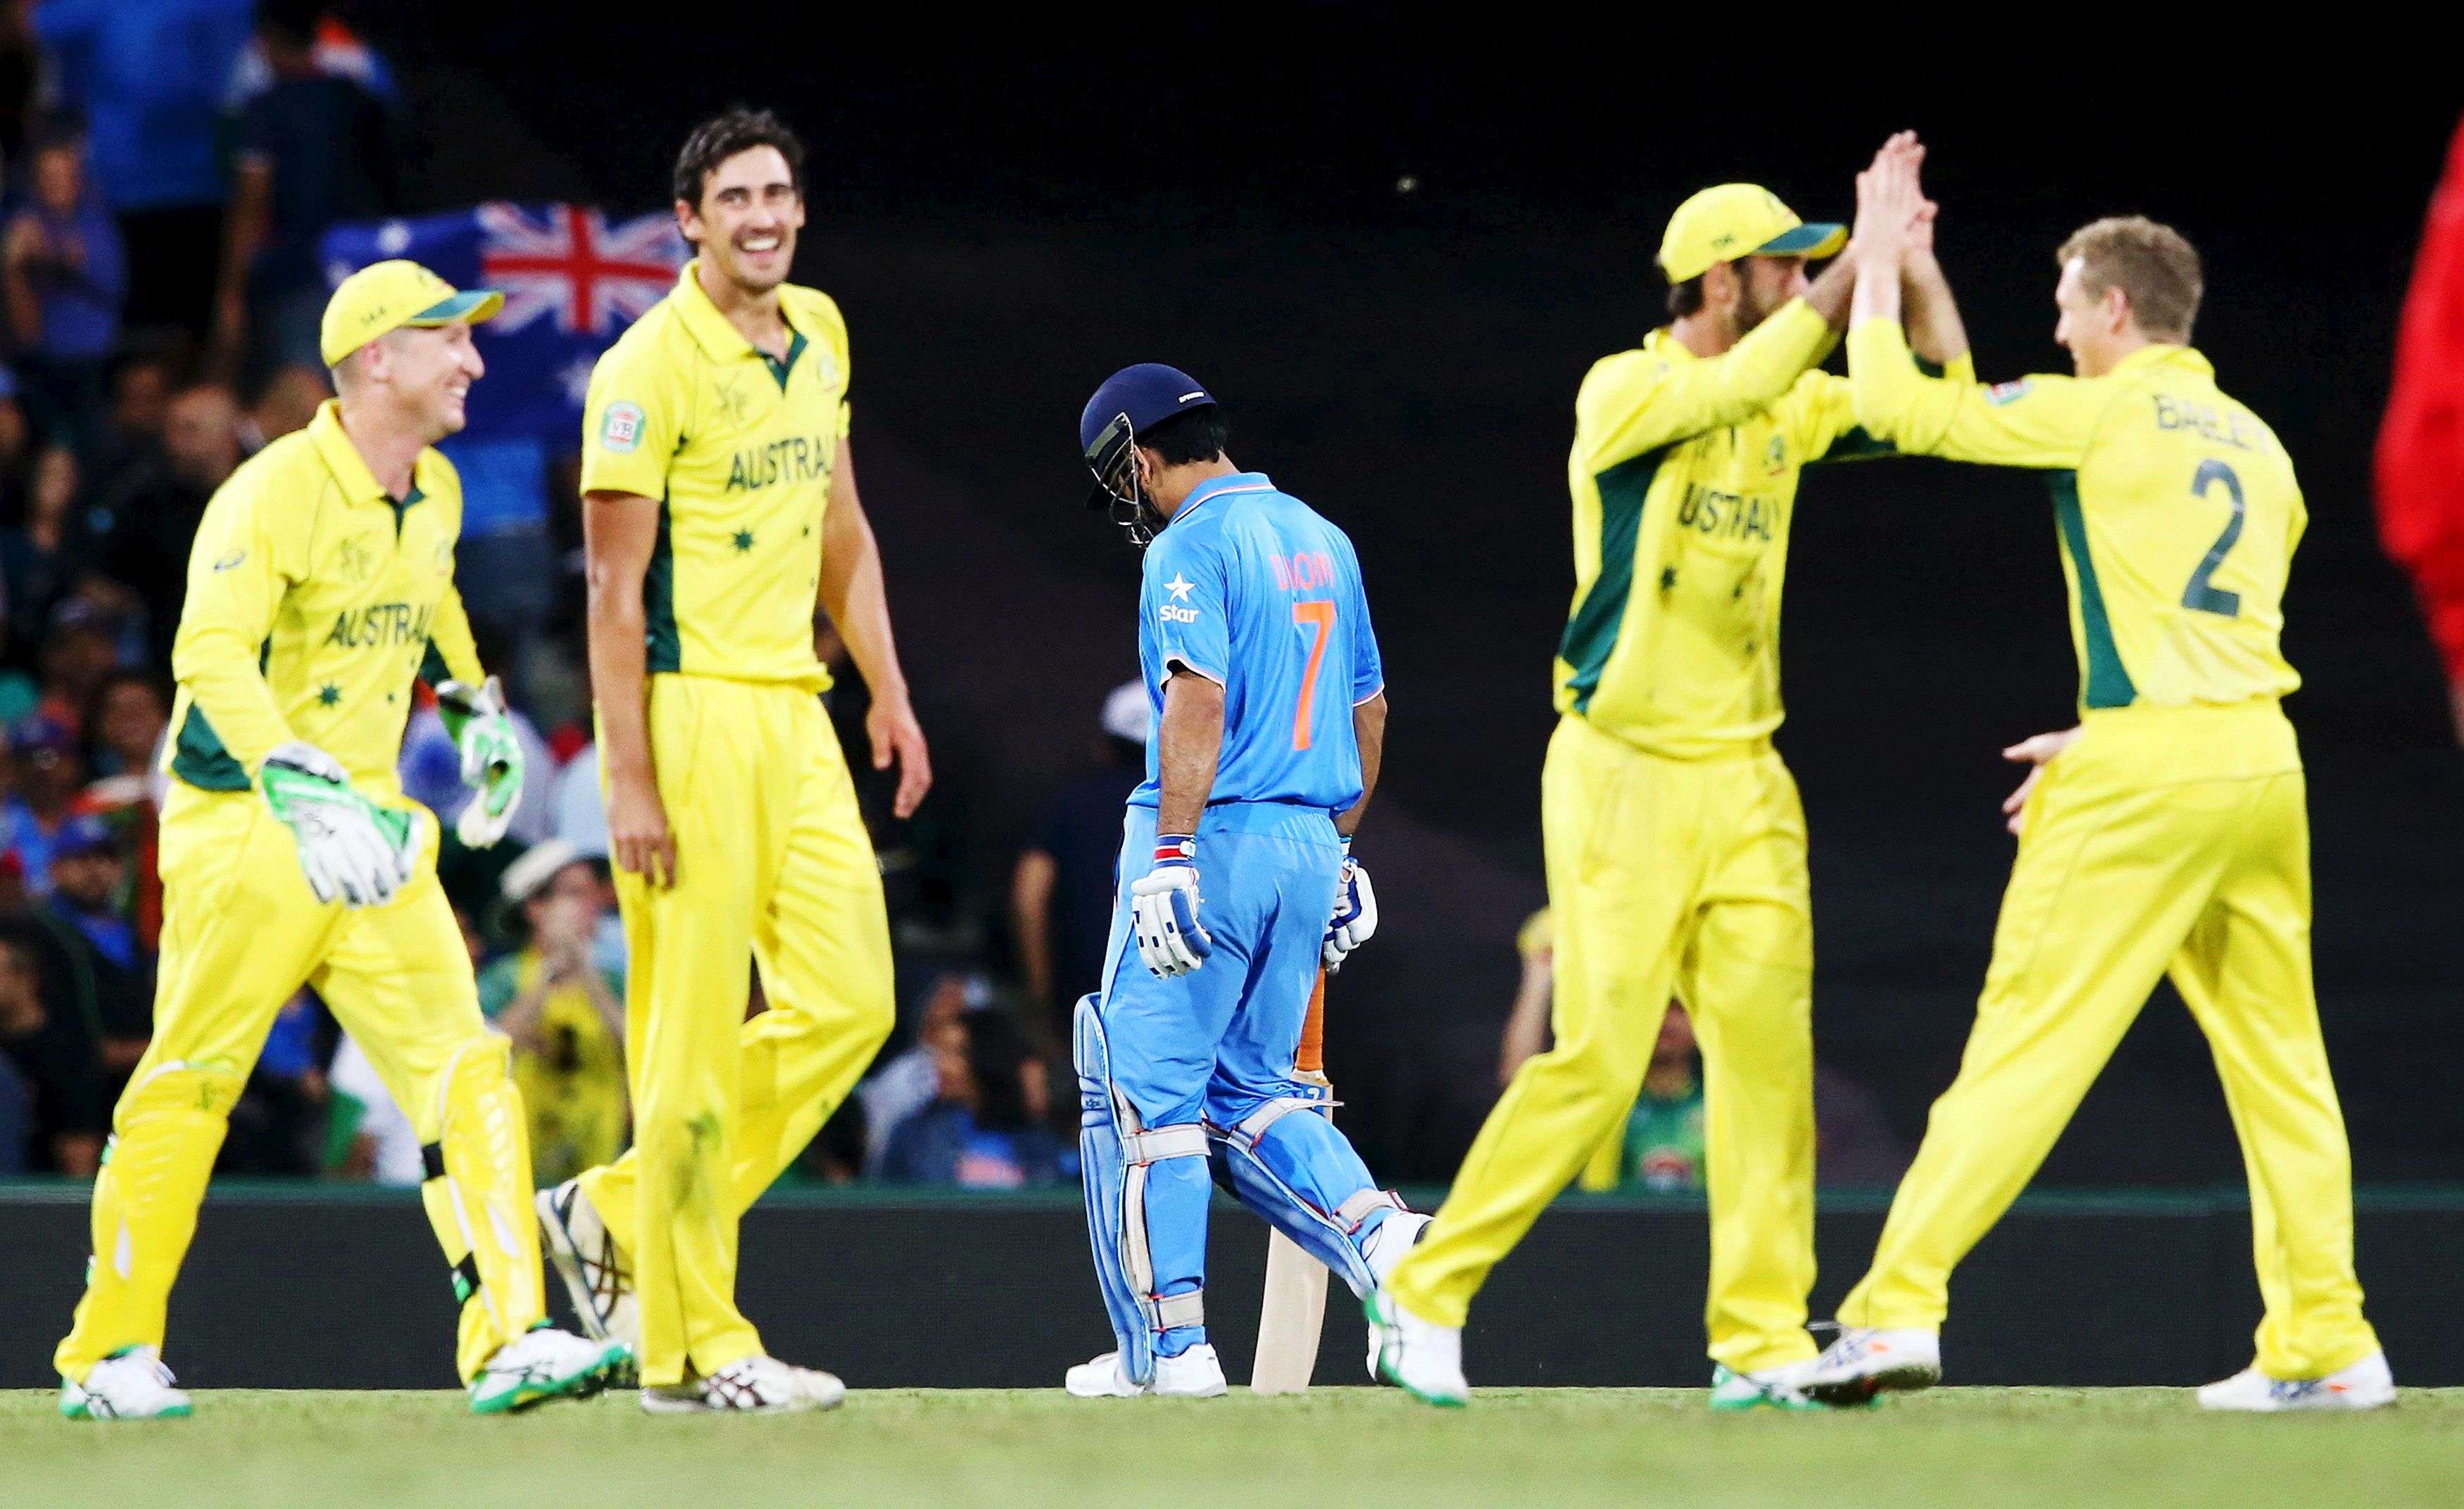 India's captain MS Dhoni walks off the pitch as Australian team mates celebrate being run out by Glenn Maxwell during their Cricket World Cup semi-final match against India in Sydney